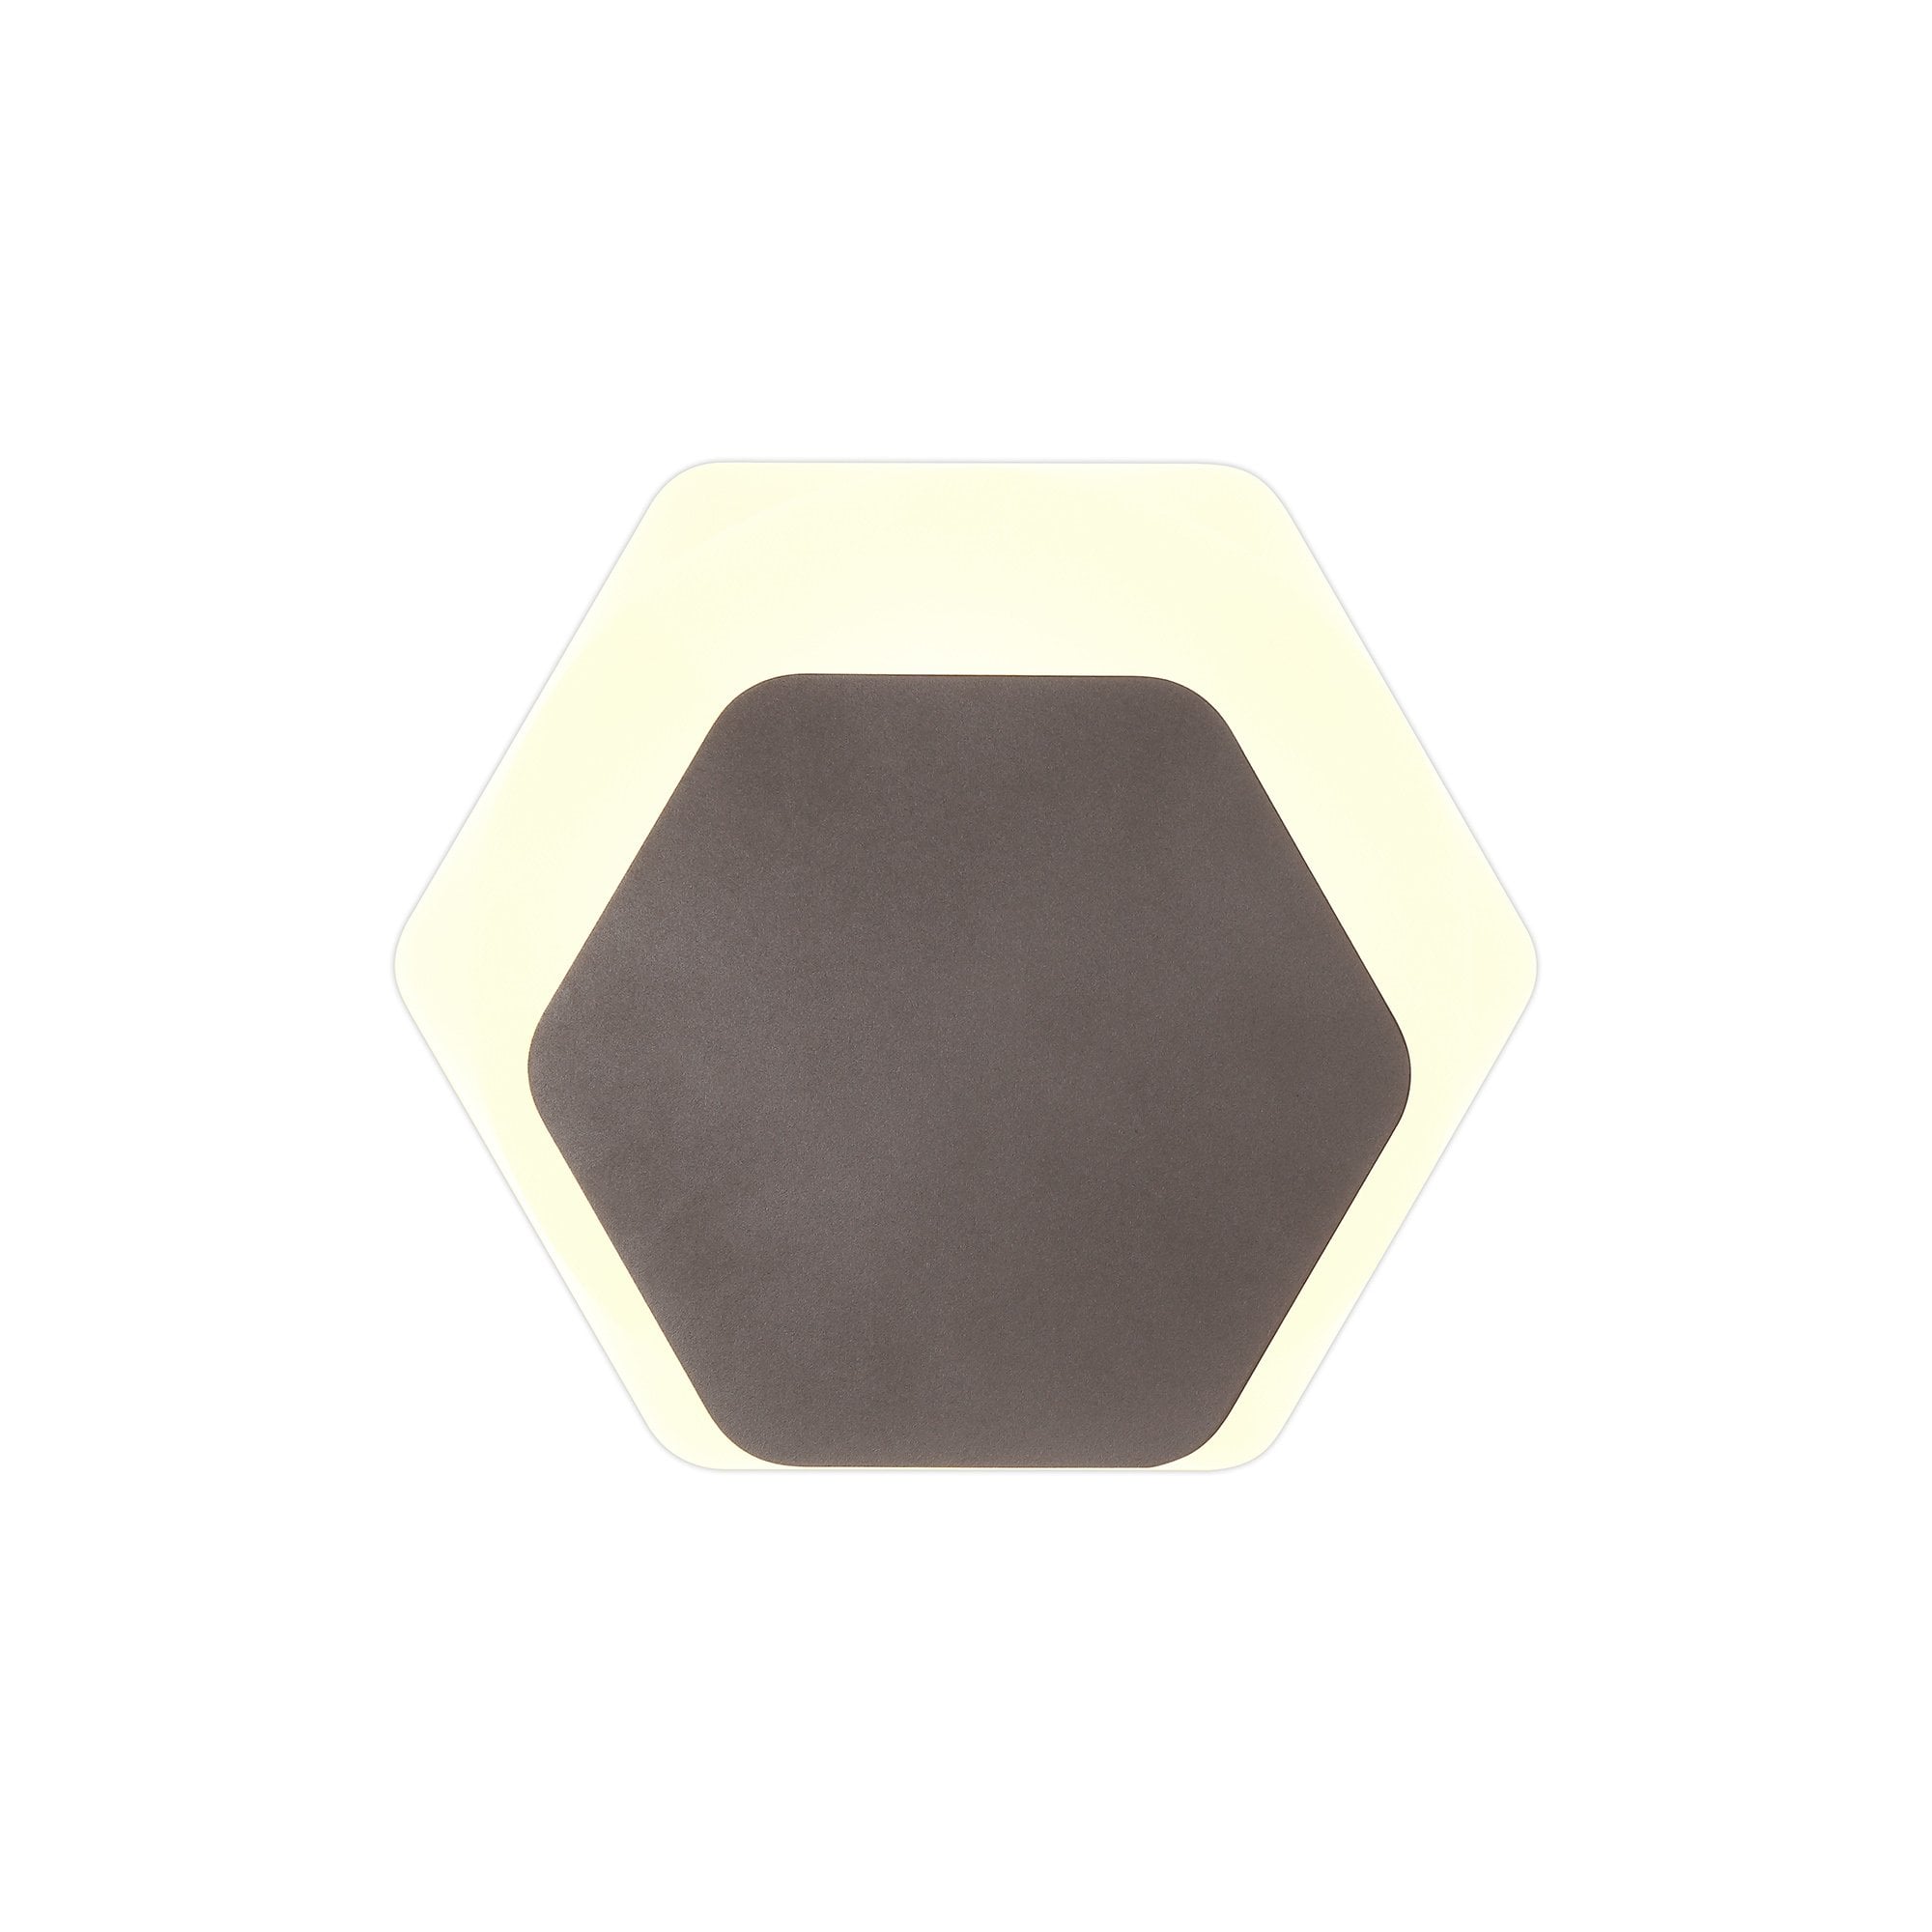 Magnetic Base Wall Lamp, 12W LED 3000K 498lm, 15/19cm Horizontal Hexagonal Bottom Offset, Coffee/Acrylic Frosted Diffuser